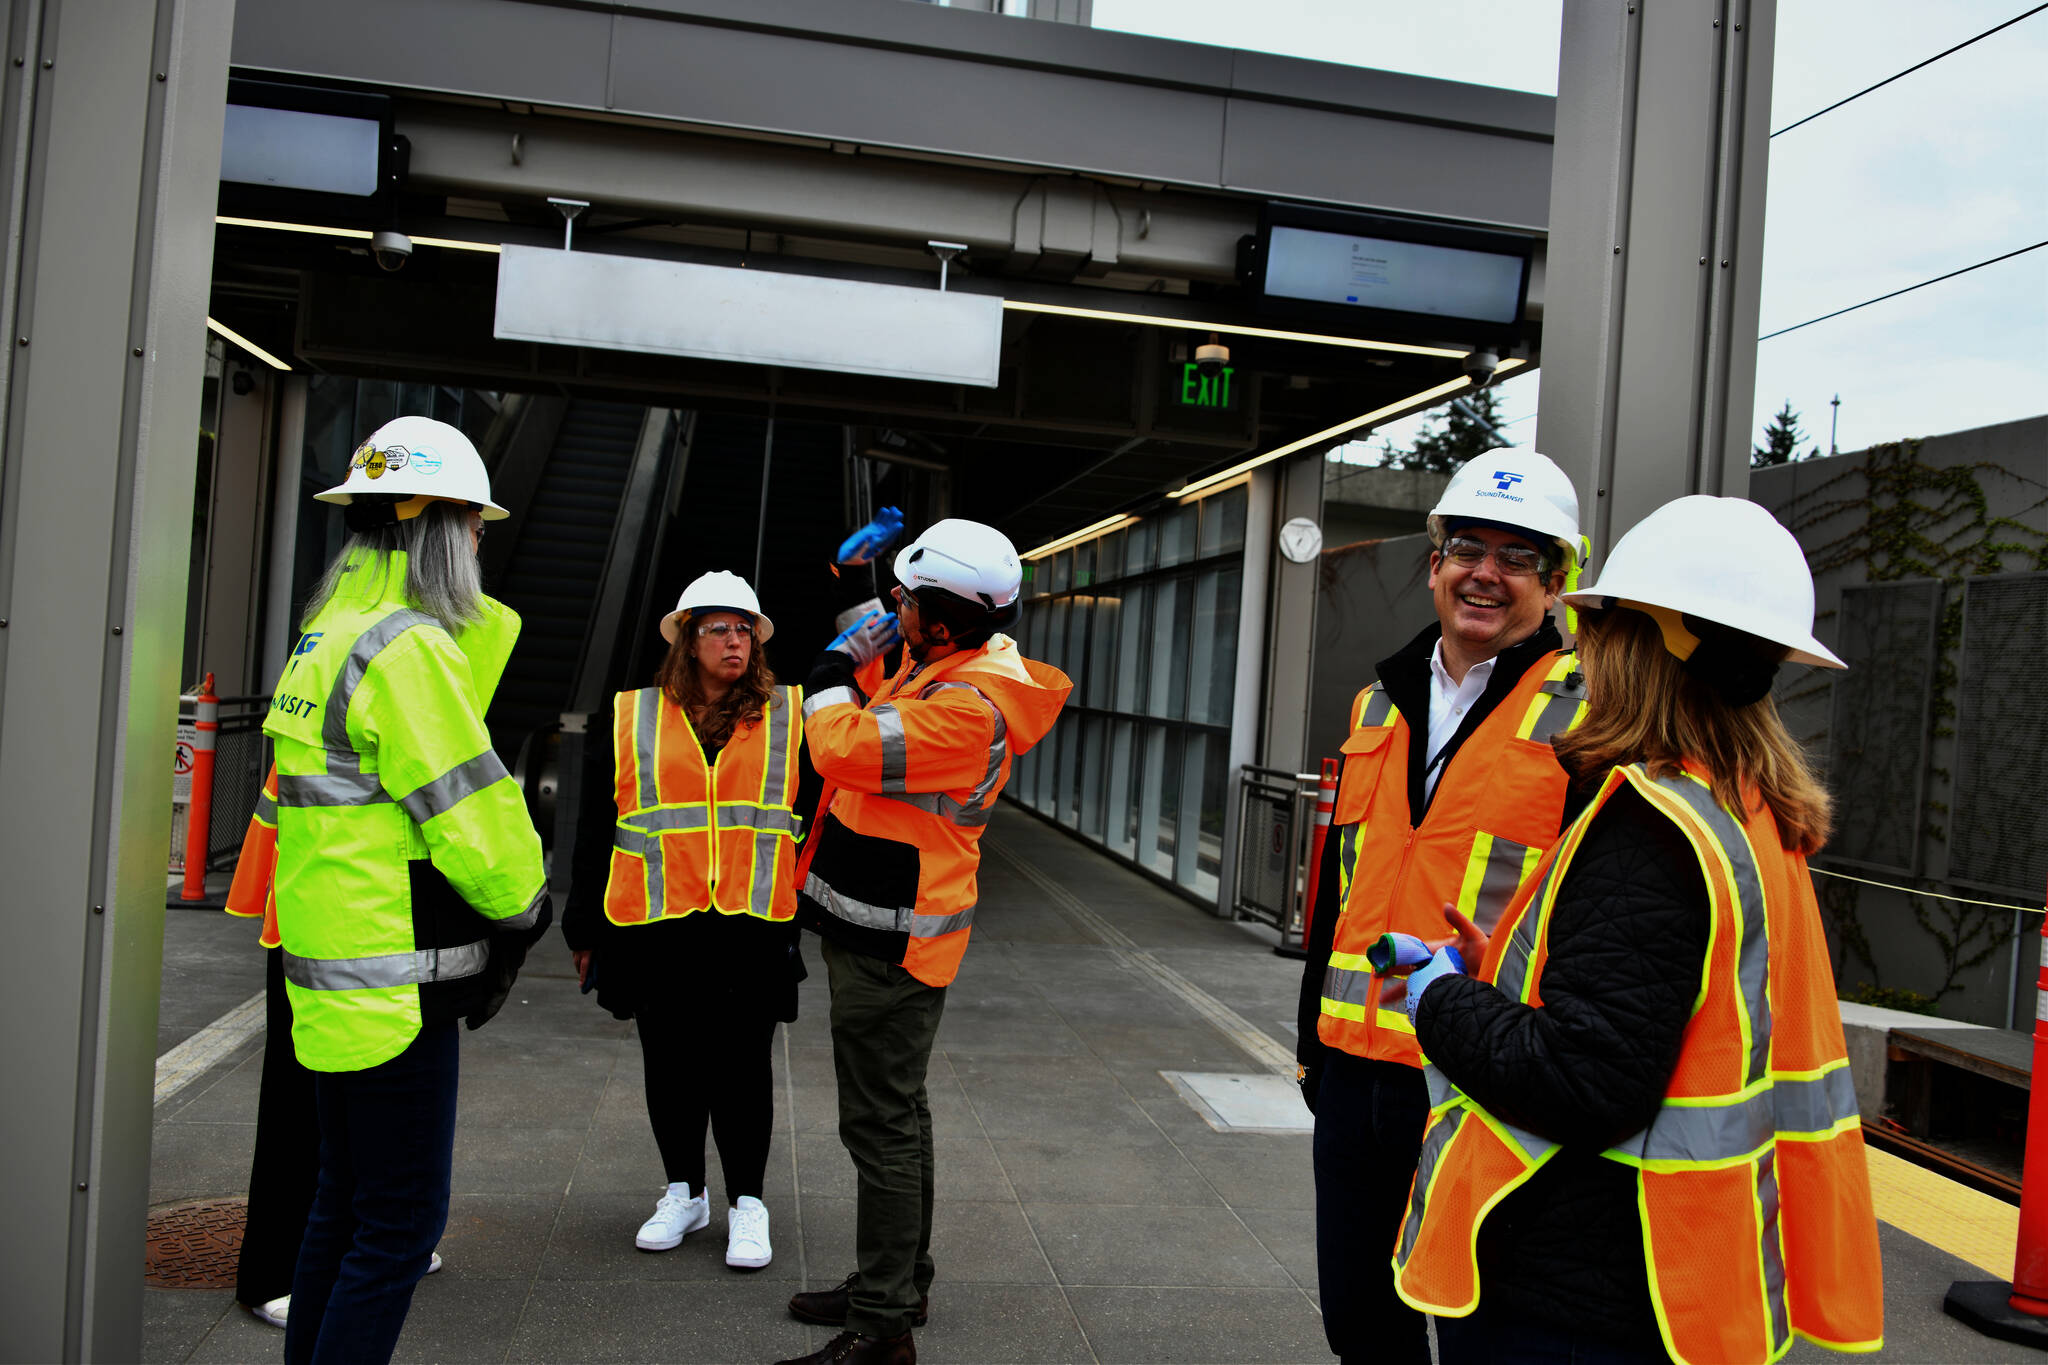 From left to right on a May 1 tour of the Mercer Island Station of the East Link Extension Project: Liz Kane, Sound Transit construction engineer; Jen Dean, Mercer Island Chamber of Commerce executive director; Andrew Austin, Sound Transit acting deputy executive director of government and community relations; Jon Lebo, Sound Transit executive project director of the East Link project; and Wendy Weiker, Mercer Island City Councilmember. Also on the tour were Sarah Bluvas, the city’s Capital Improvement Program project manager; and Rachelle Cunningham, Sound Transit public information officer. Andy Nystrom/ staff photo